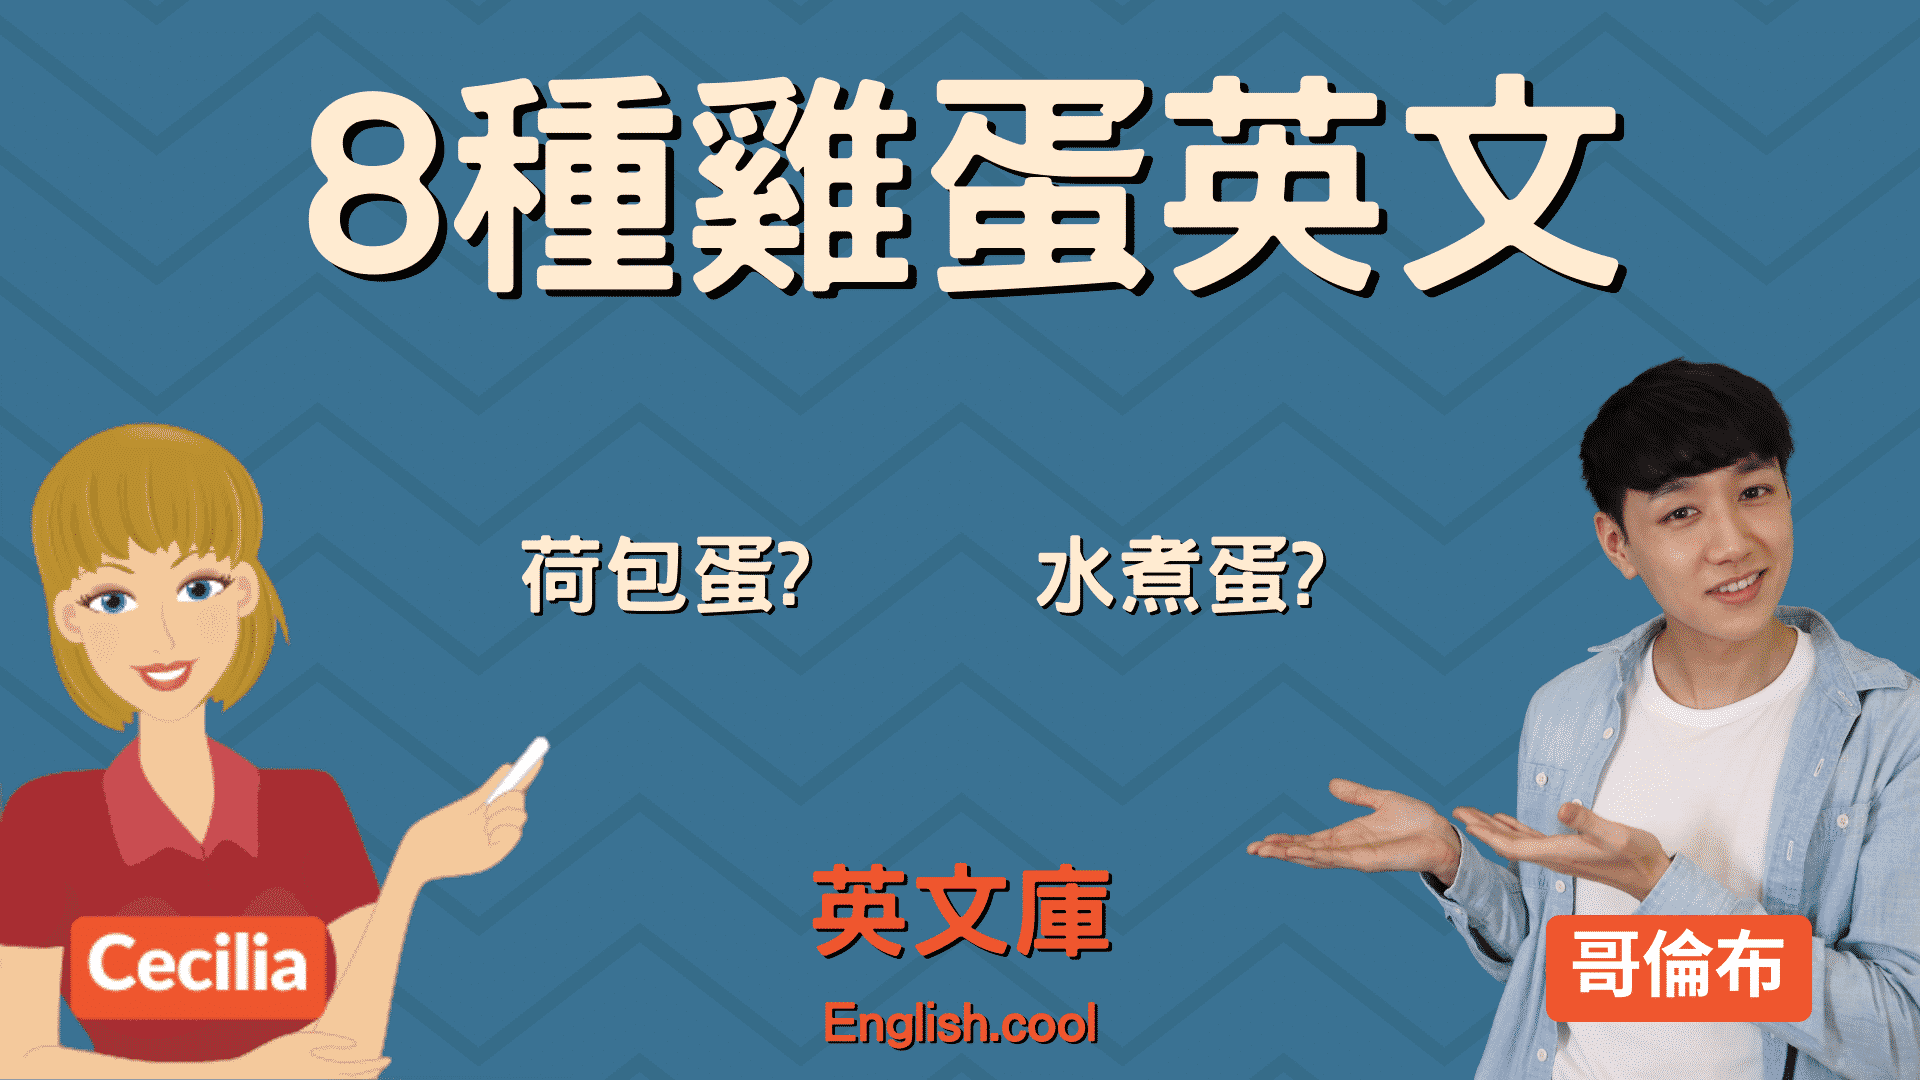 You are currently viewing 【8 種雞蛋煮法英文】荷包蛋？煎蛋？How do you like your eggs? 來一次搞懂！